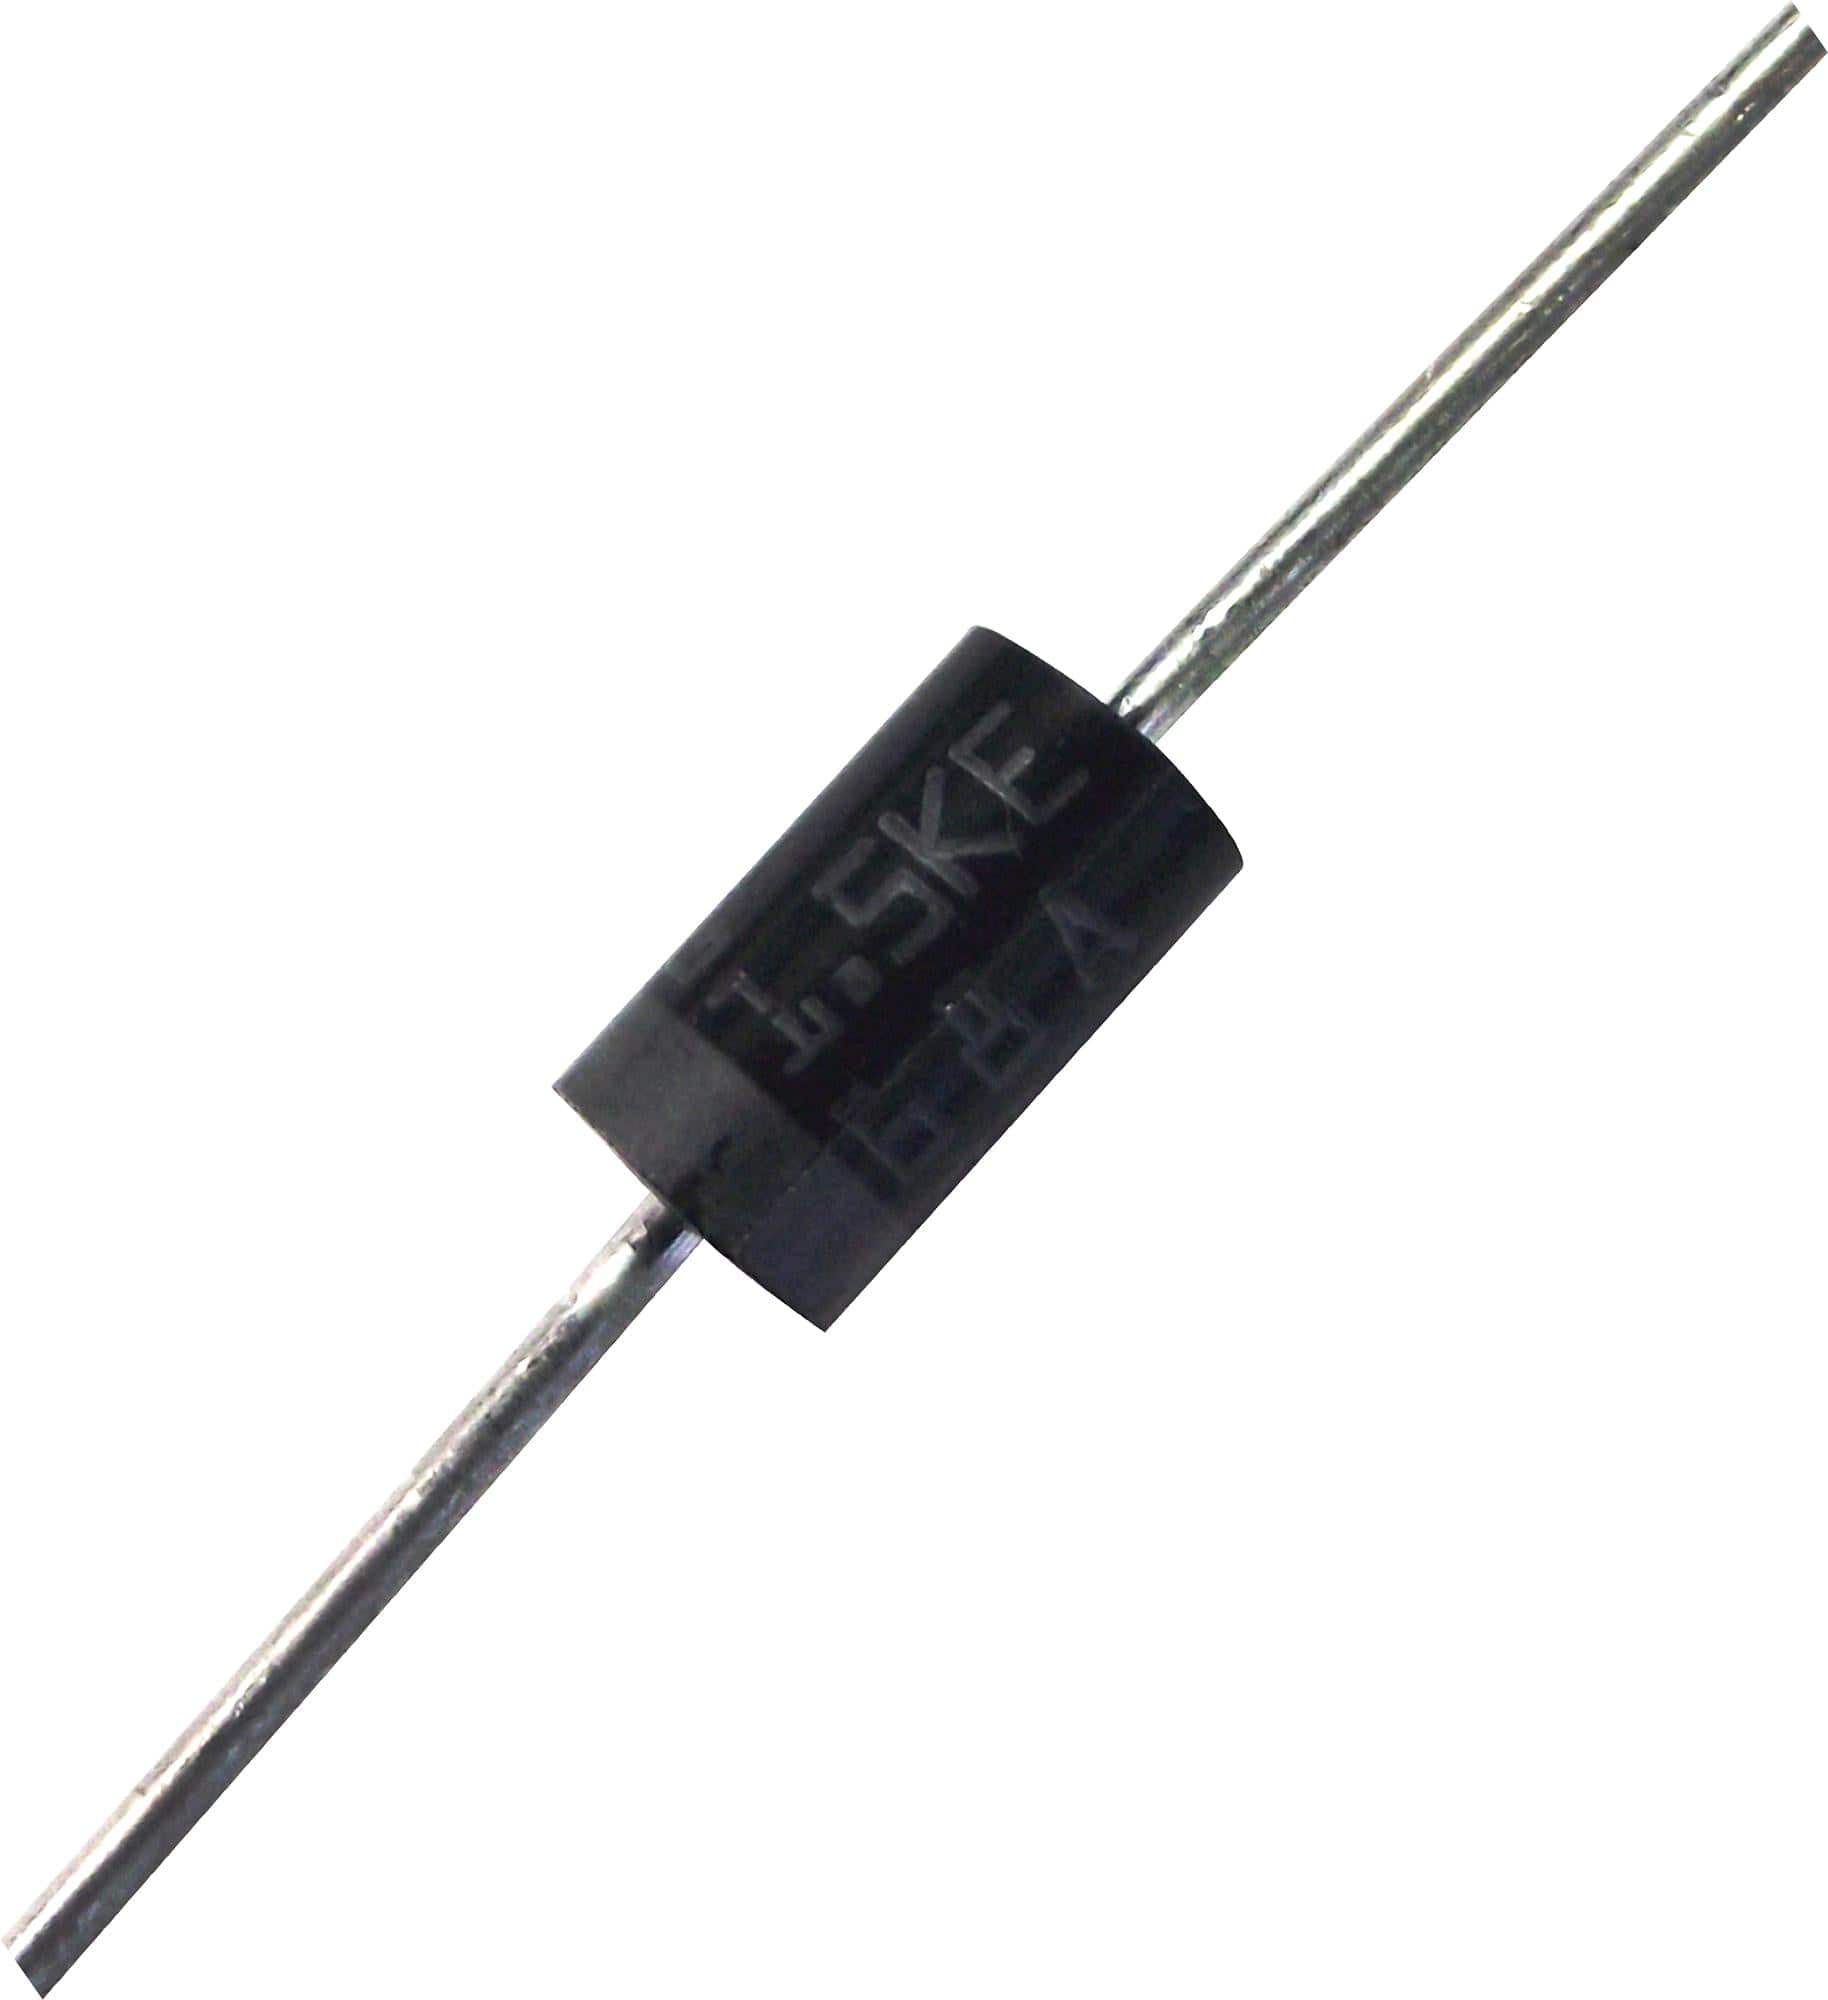 STMICROELECTRONICS Transient Voltage Suppressors 1.5KE440A DIODE, TVS, 440V, 1.5KW STMICROELECTRONICS 9885072 1.5KE440A